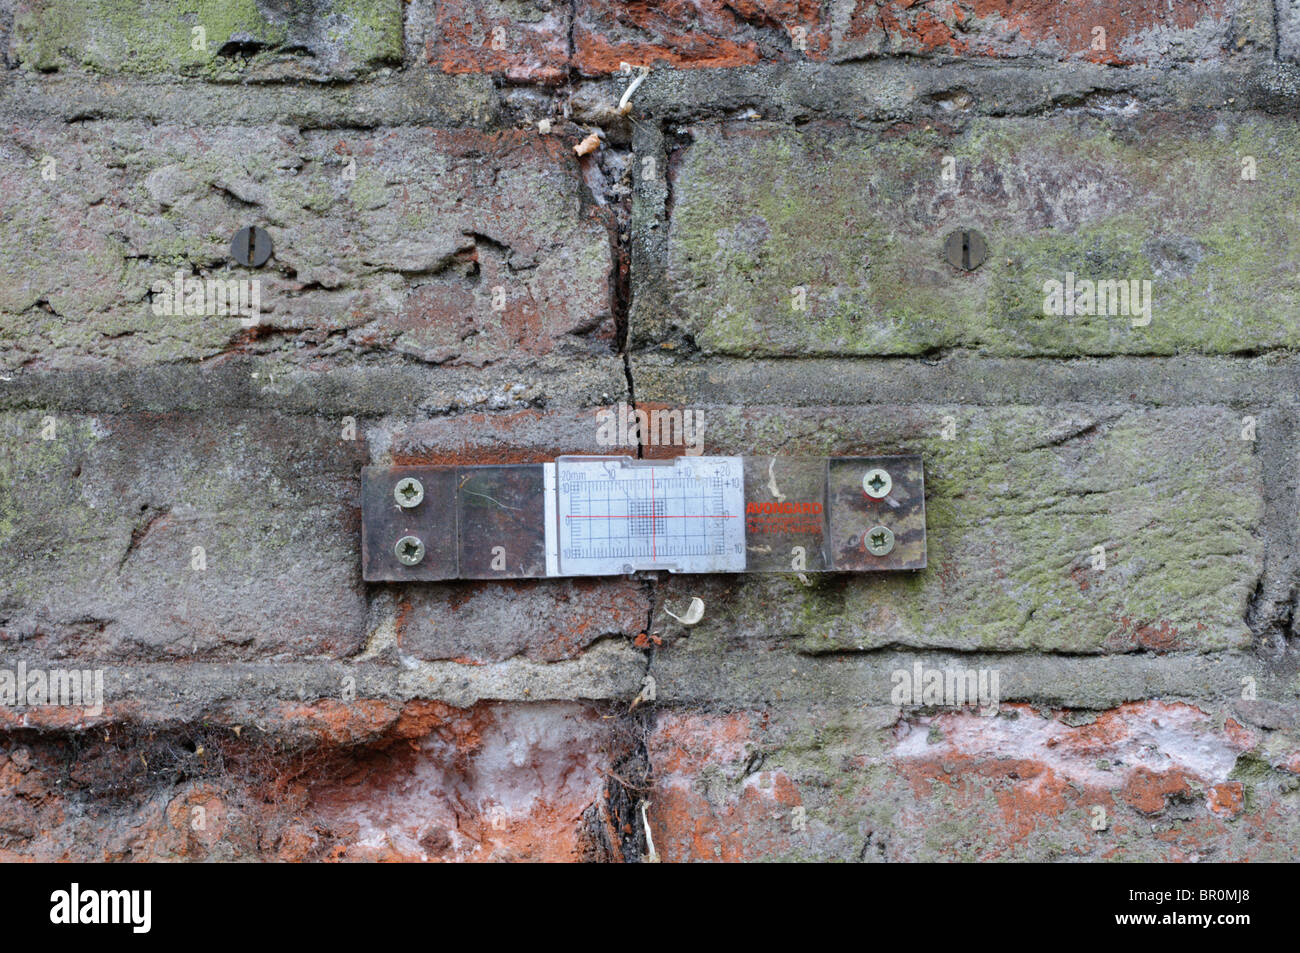 A tell-tale placed across a structural crack in brickwork to measure any change or worsening over time Stock Photo